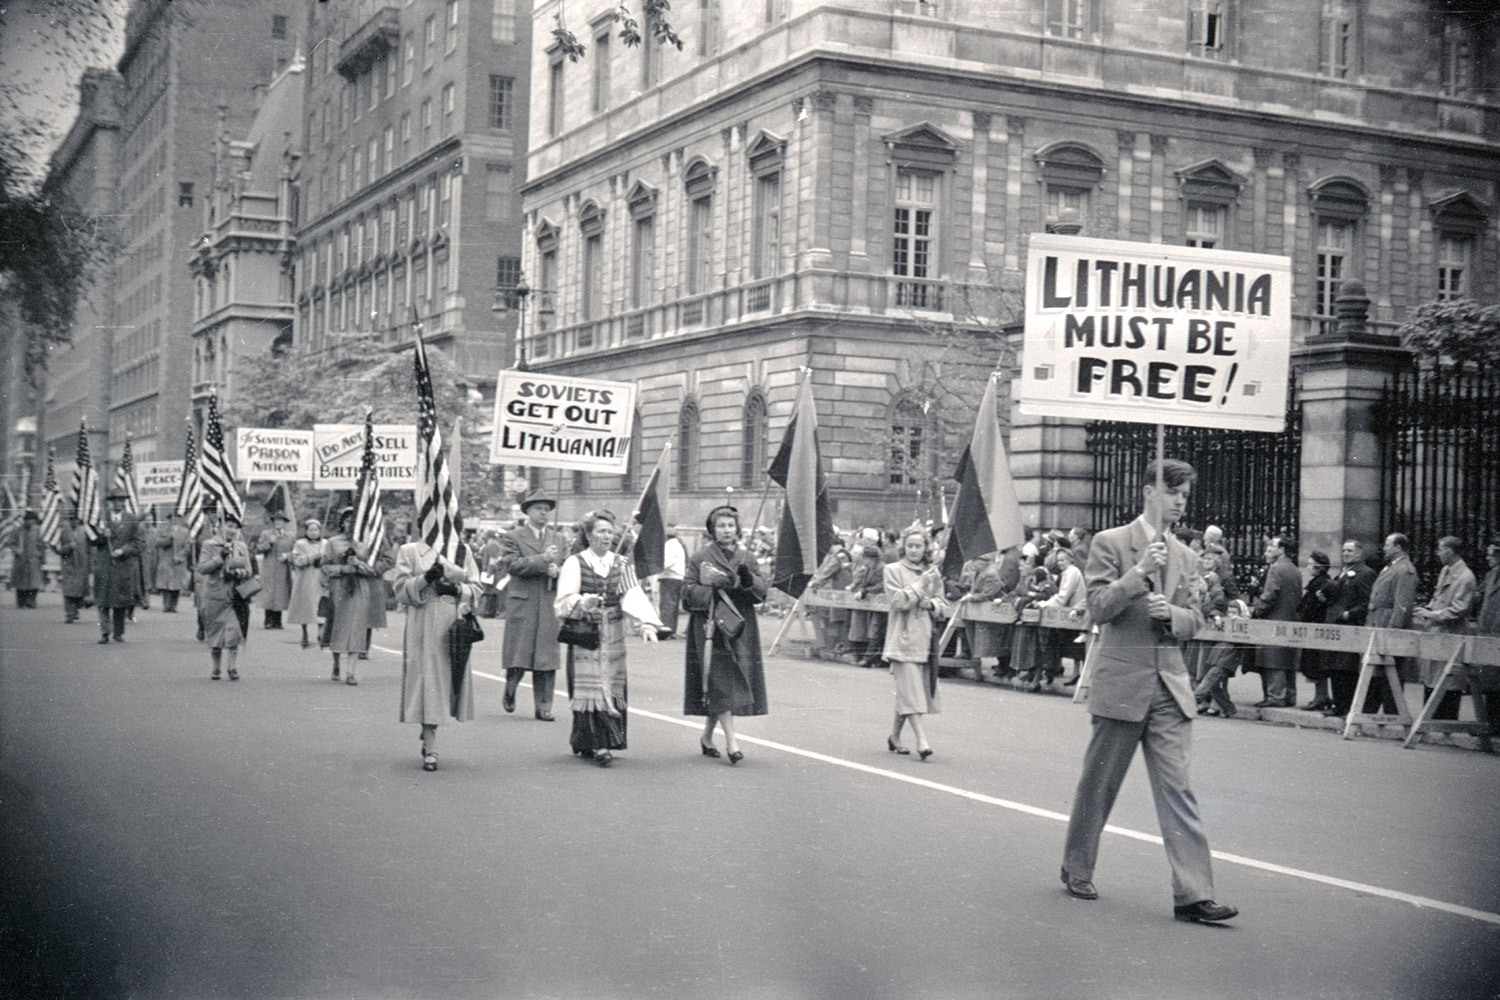 1953 – New York, USA. A group from the Lithuanian American community at the Loyalty Day parade. In the first row, Kęstutis Trimakas holds a poster, next to him – the Chairman of the American Lithuanian Council of New York, organiser of the parade’s Lithuanian group, publicist and lawyer Steponas Briedis. LVCA, photographer: G. Penikas.